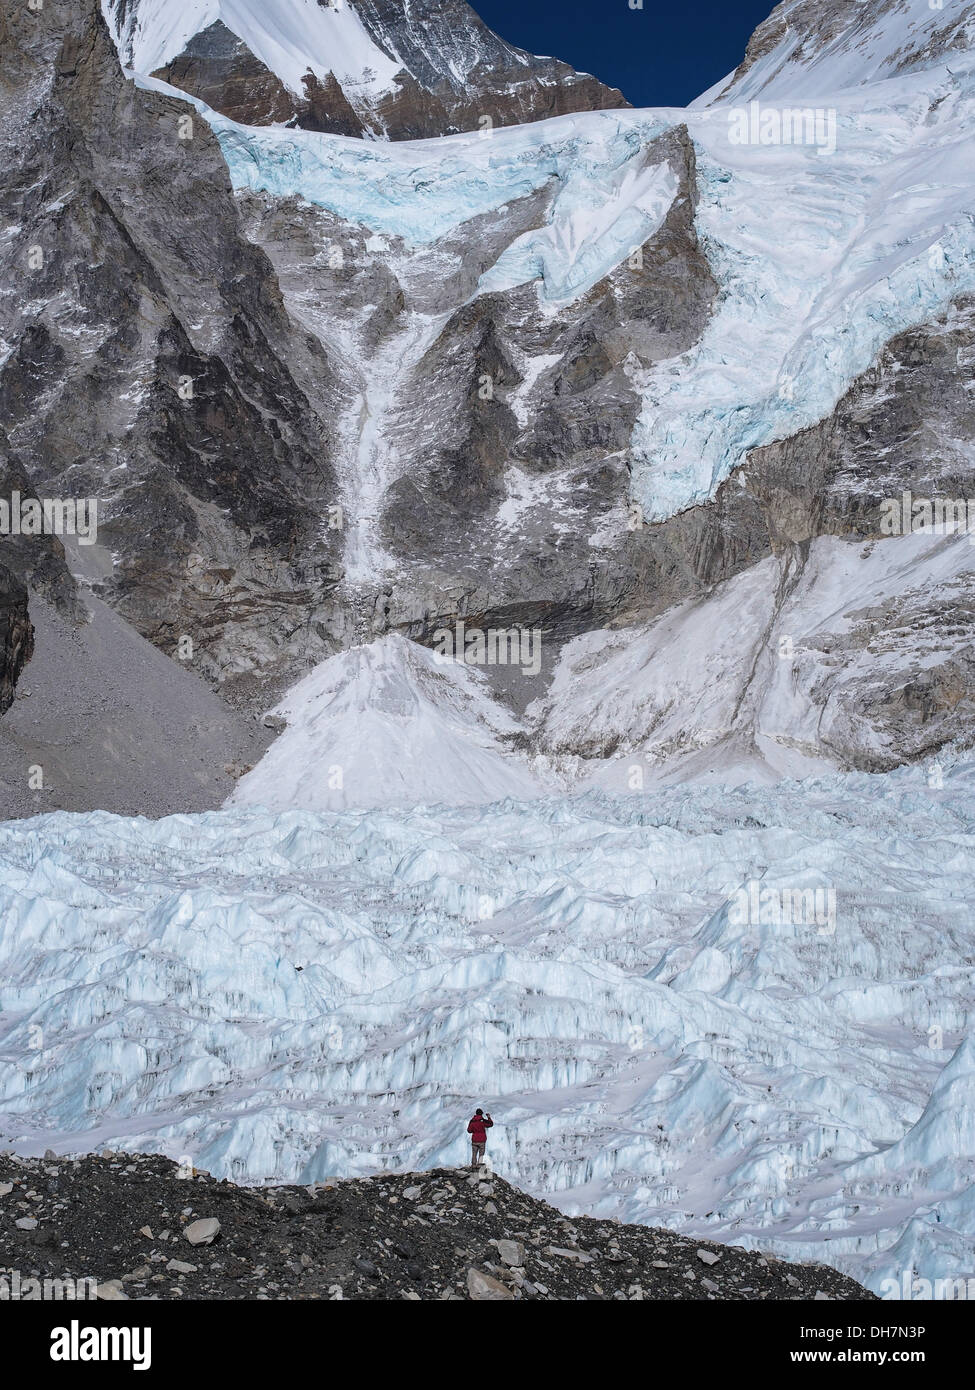 A trekker standing in front of the massive Khumbu Glacier near Everest Base Camp in Nepal. Stock Photo